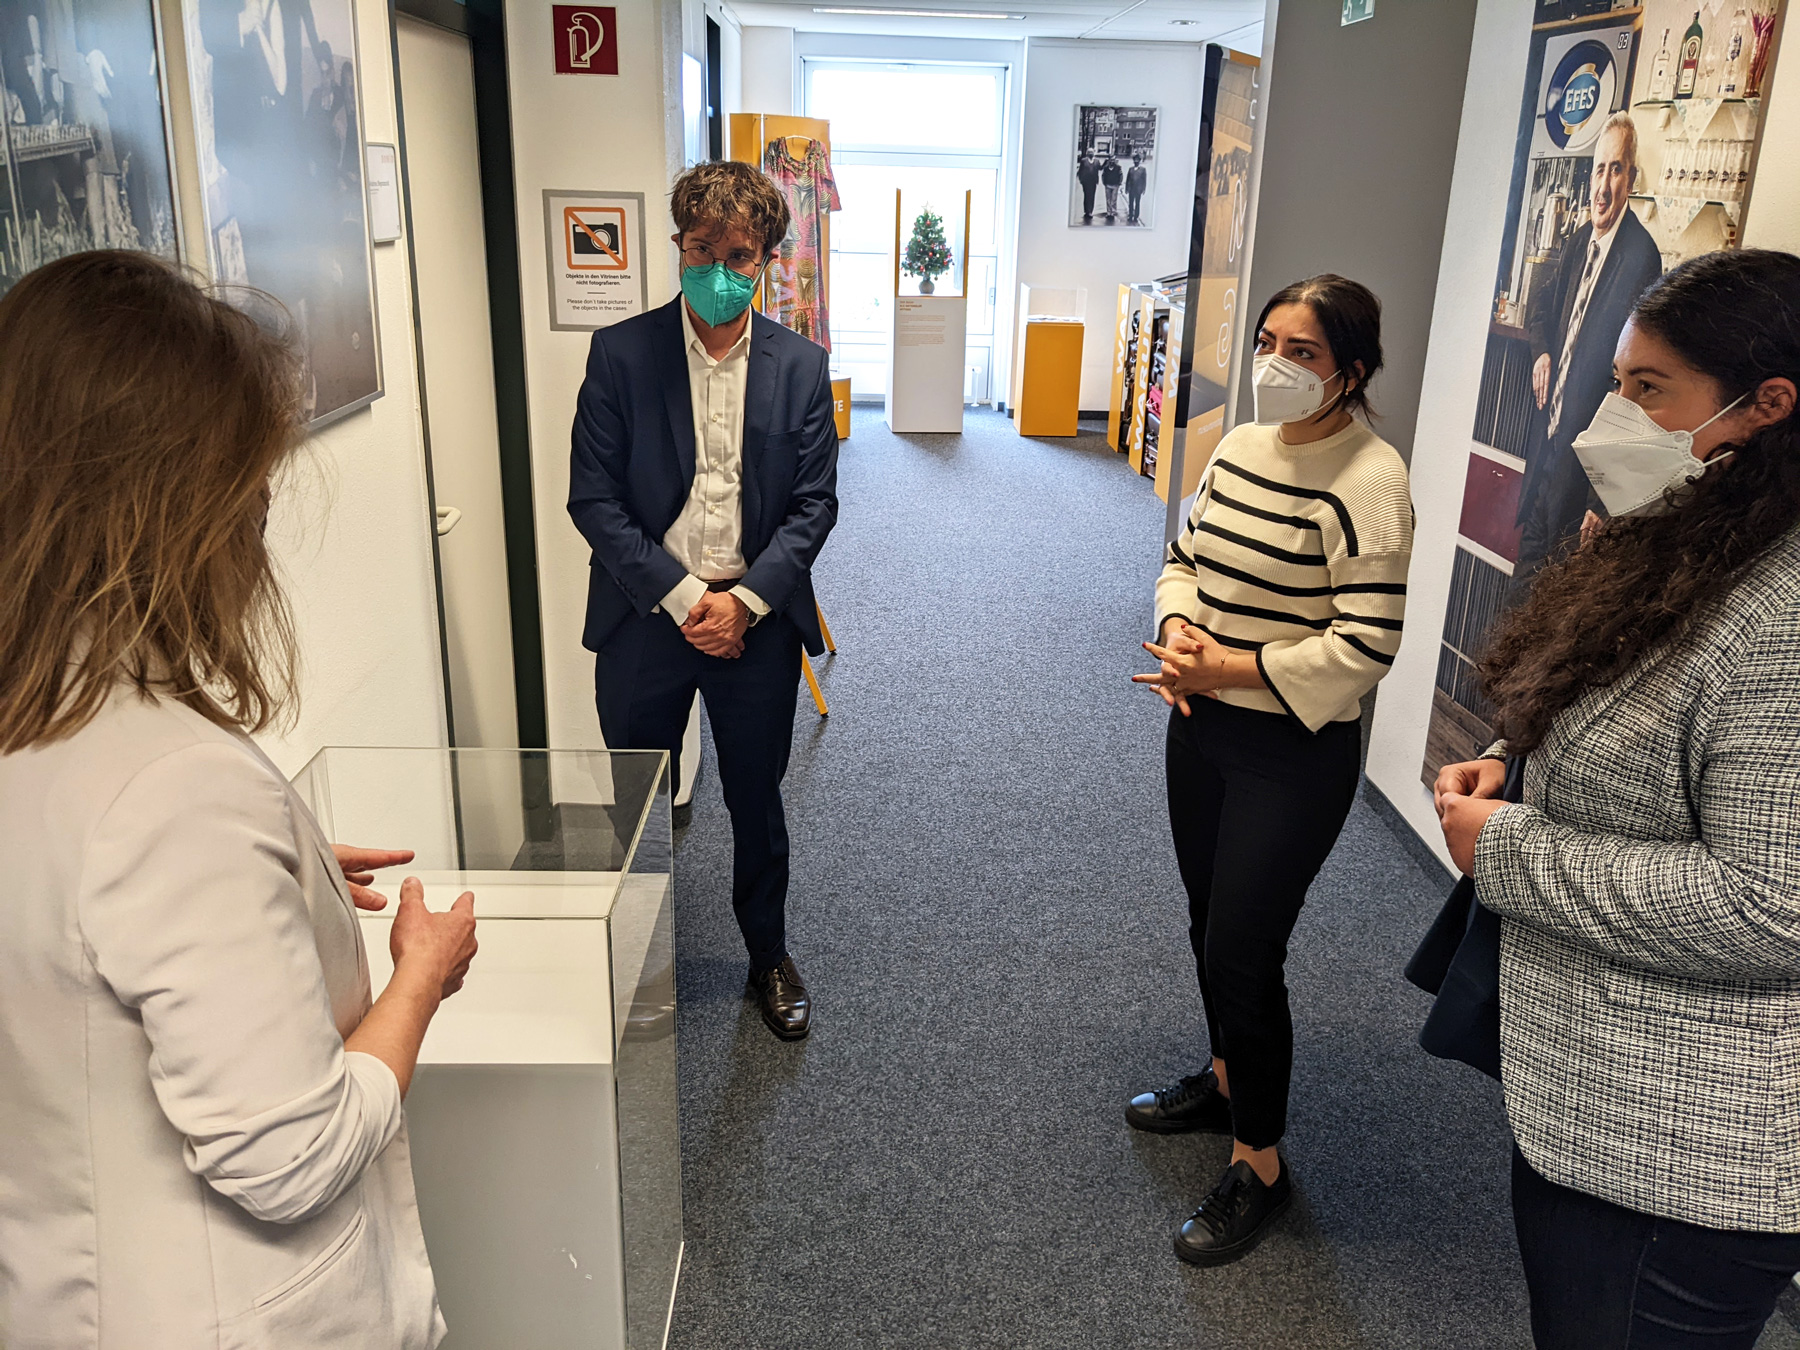 Topics such as identity, hierarchies of migrant groups, admission procedures or camps and reception facilities were also not left out of the tour at DOMiD.